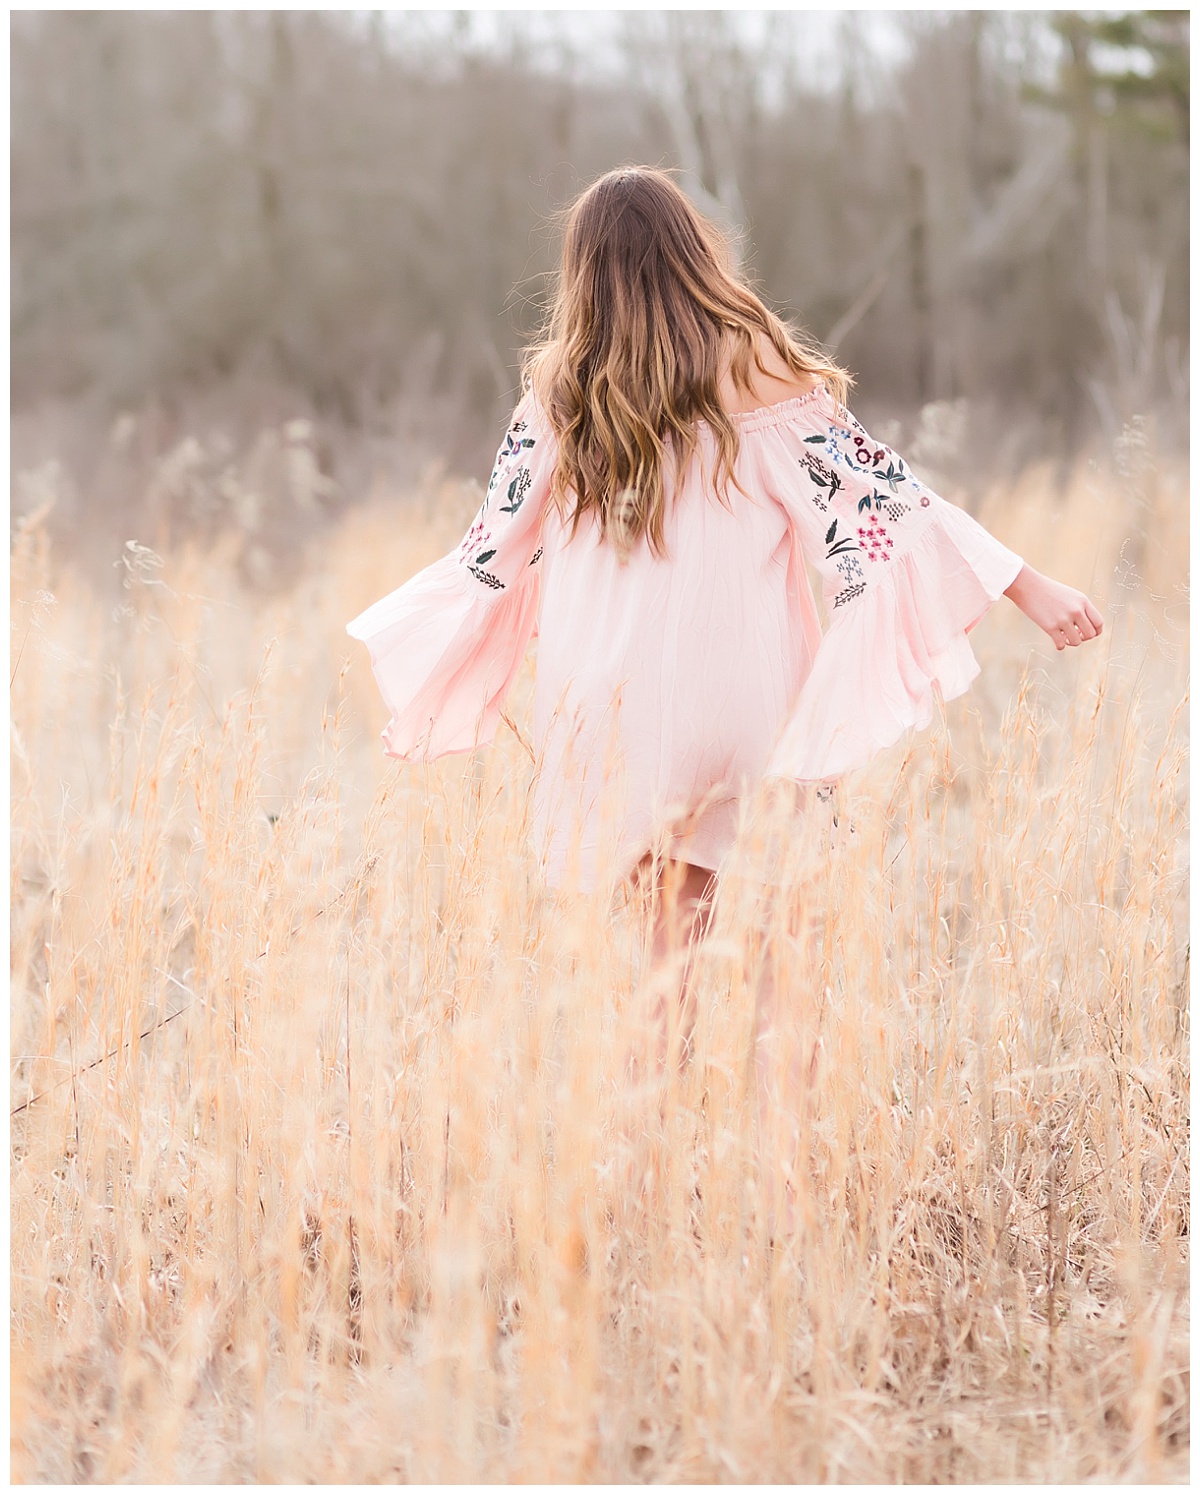 Senior girl in pink dress twirling in field of tall grass